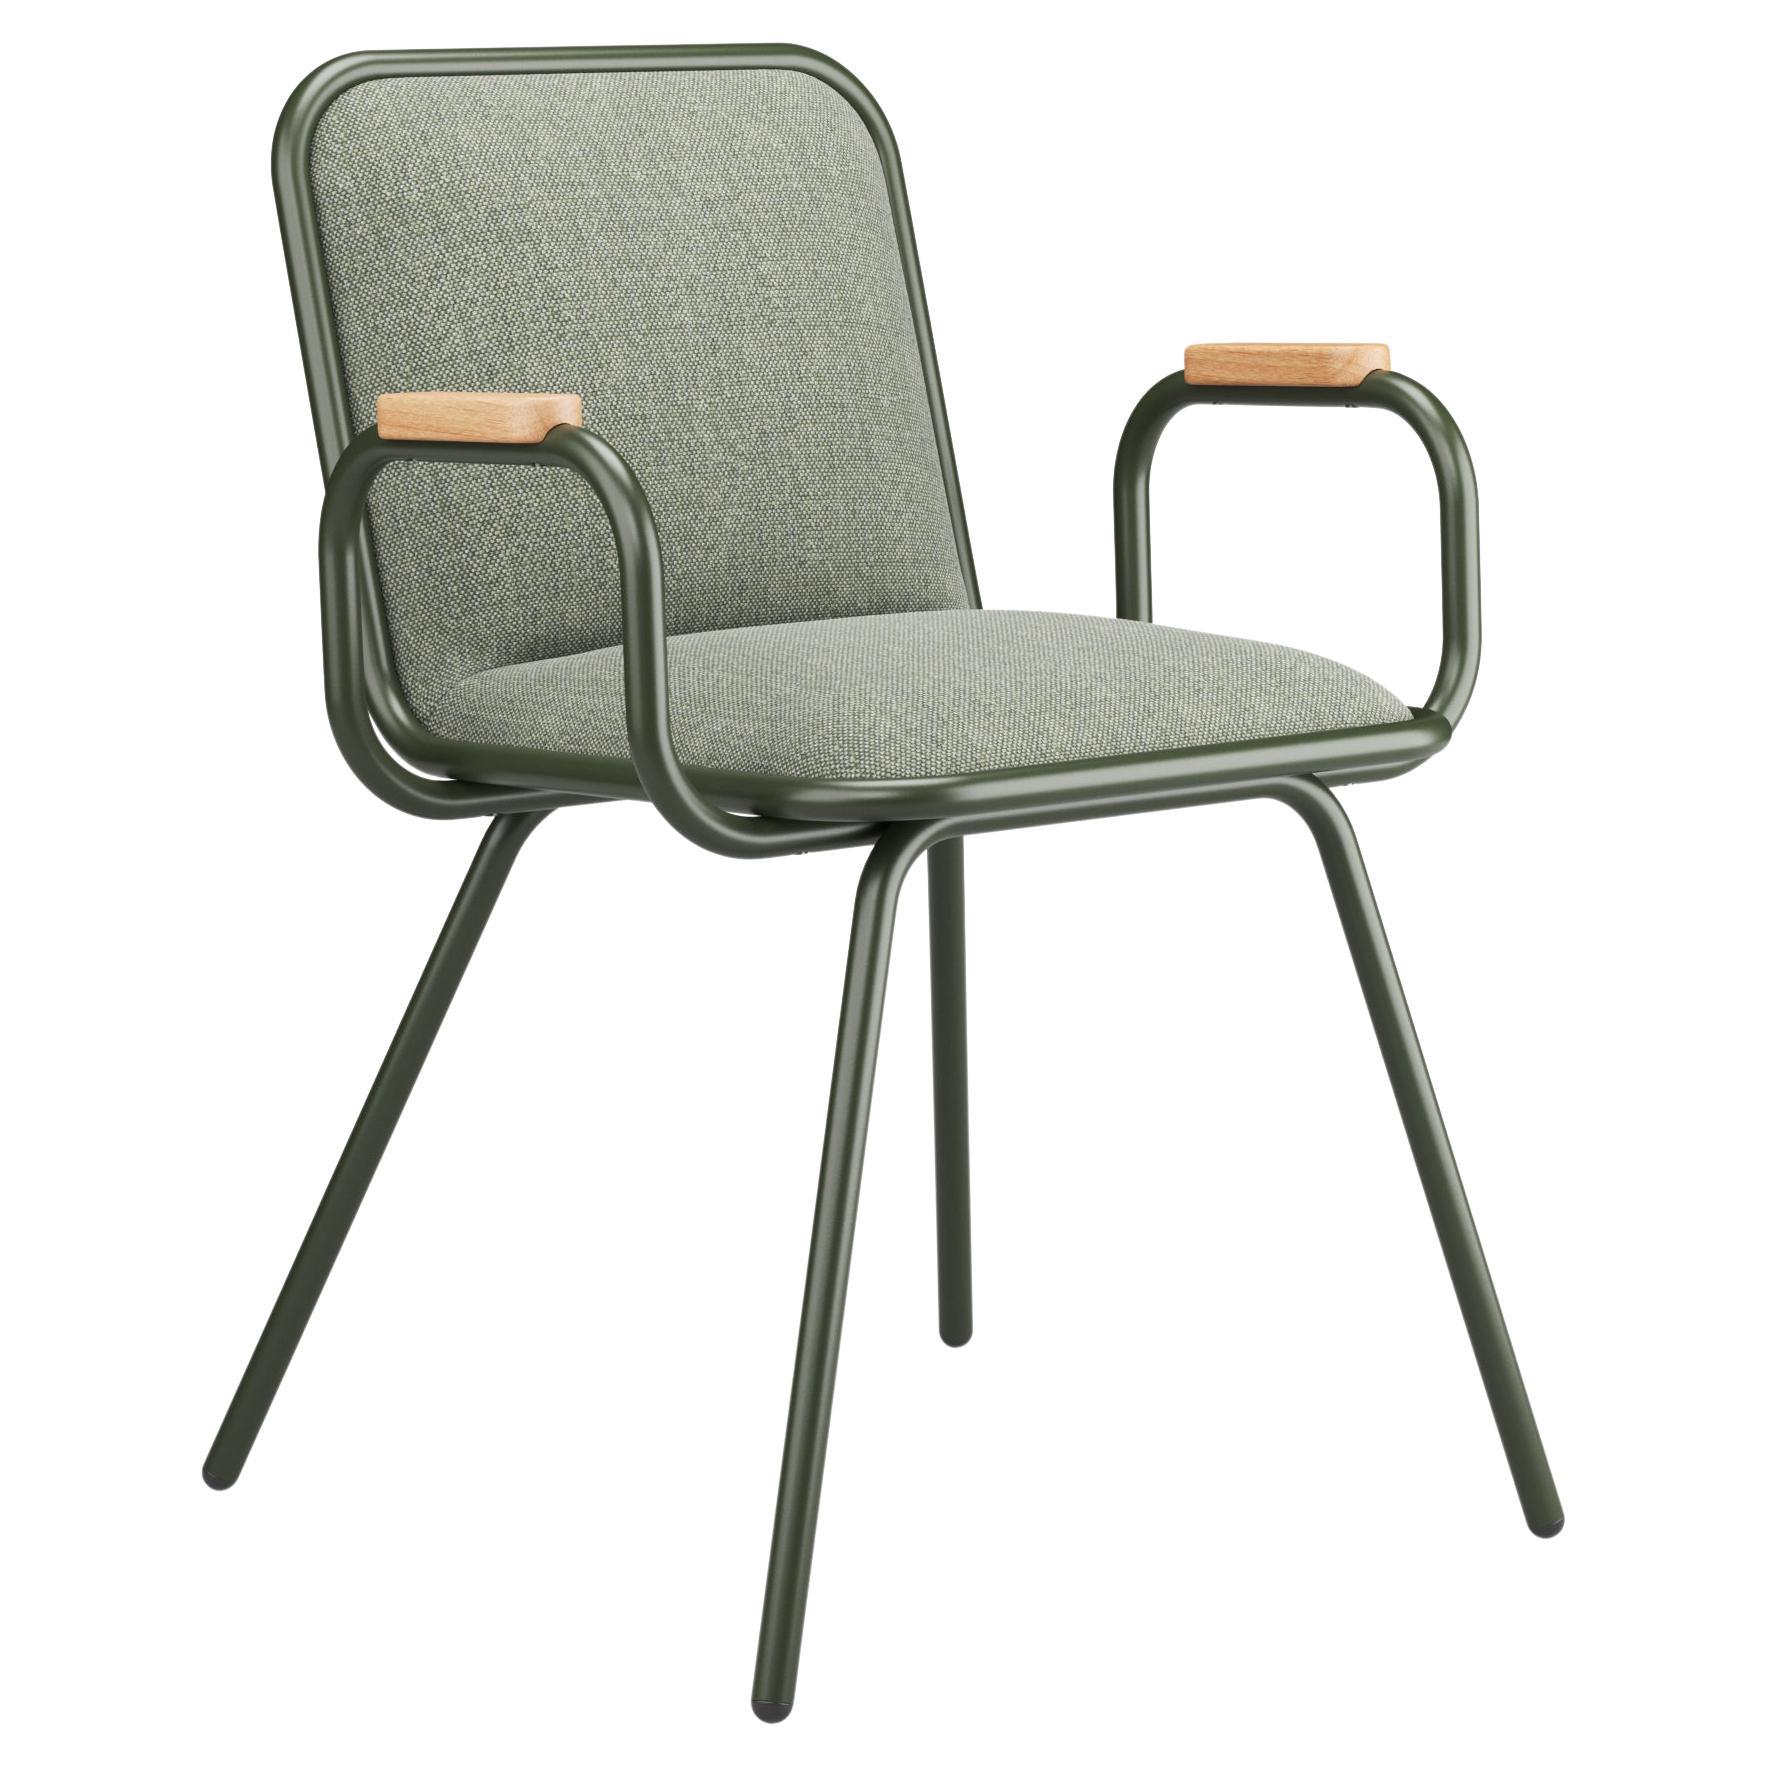 Hayche Dulwich with Armrest - Green, UK, Made to Order For Sale